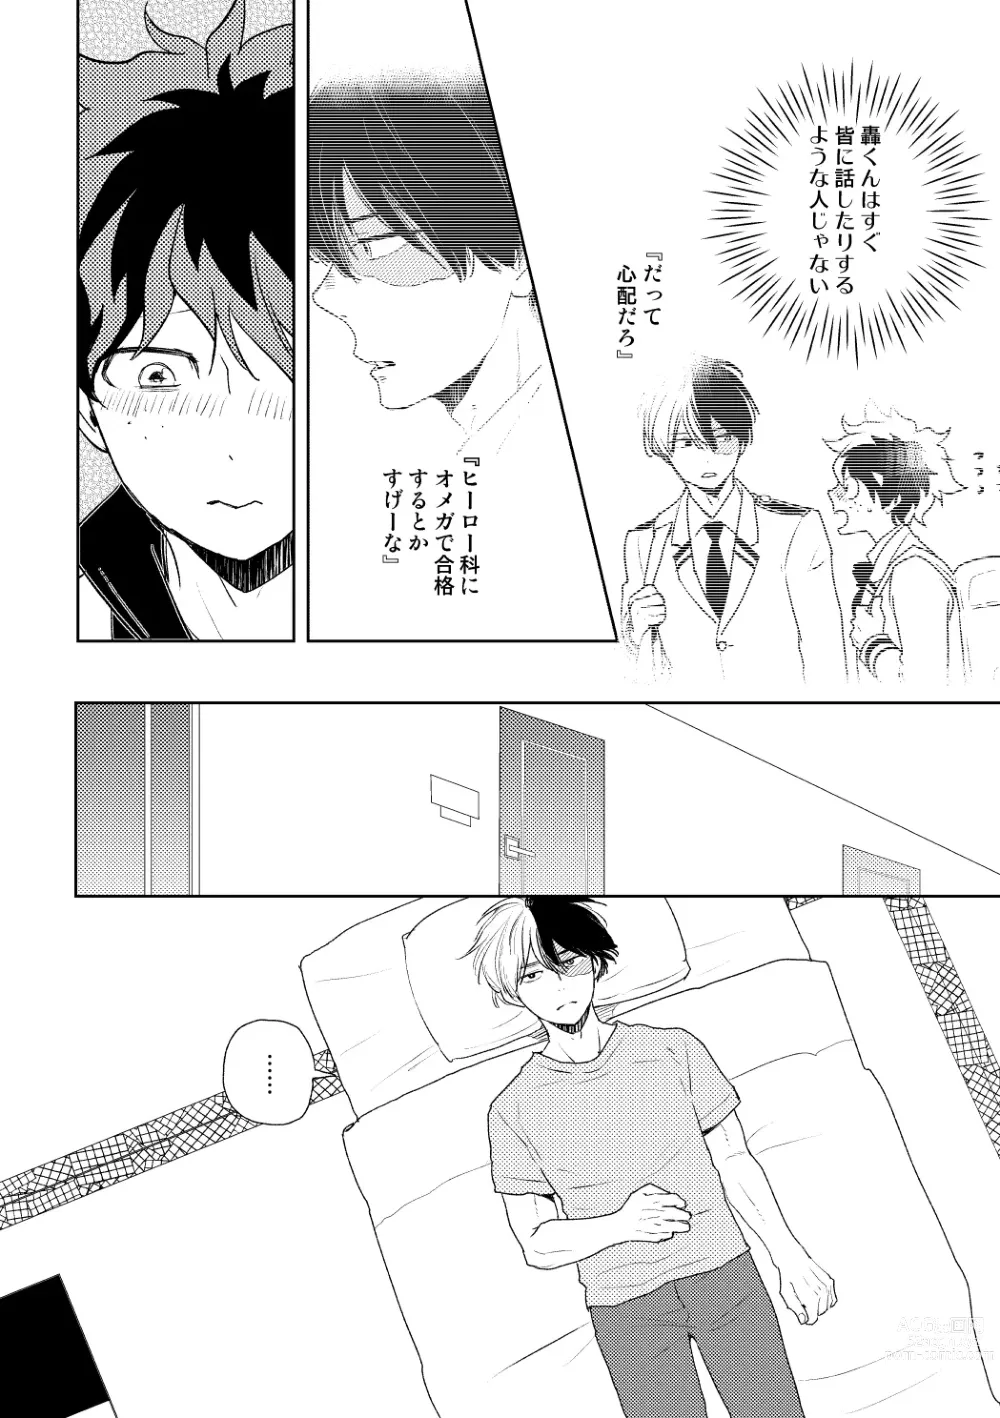 Page 13 of doujinshi DISTANCE